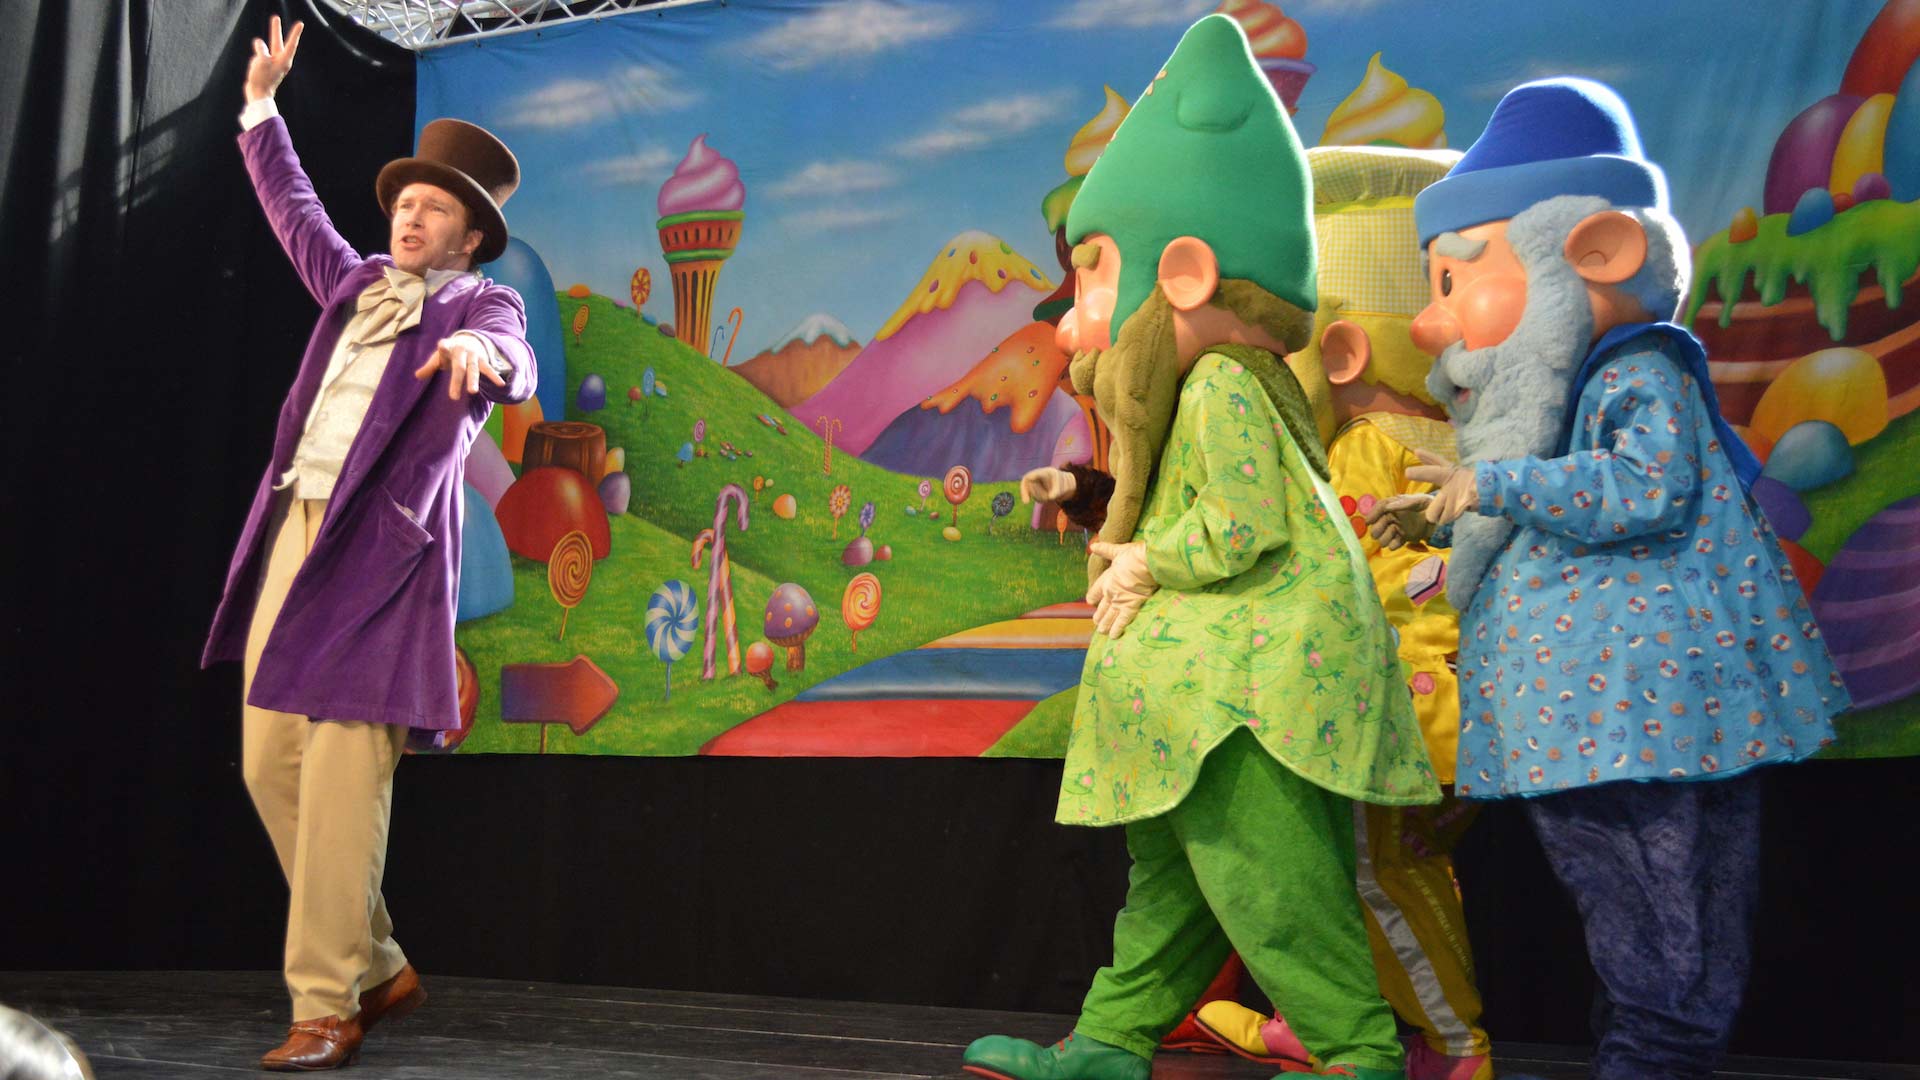 One of our many MetroCentre Gateshead shows, featuring Willie Wonka and the Q20-created MetroGnomes.